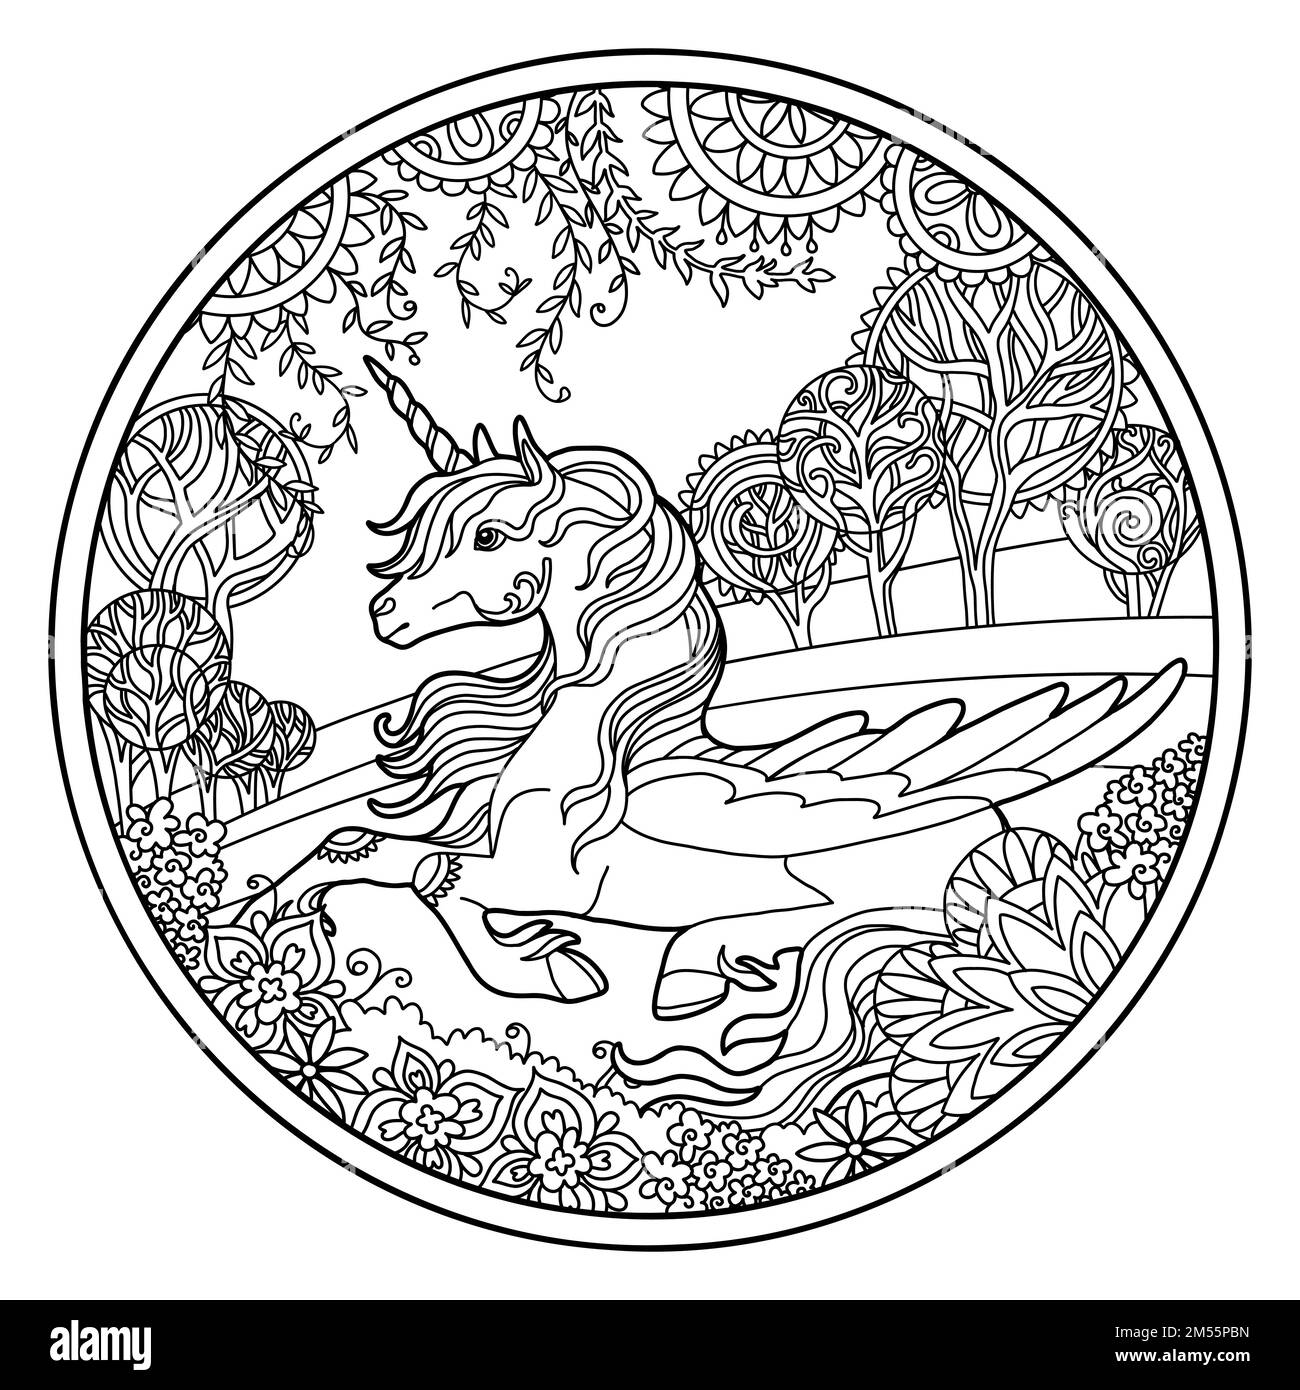 Lying unicorn with wings in flower frame round shape. Drawing magic horse for coloring book, shirt design, puzzle, print, decor. Stylized vector illus Stock Vector